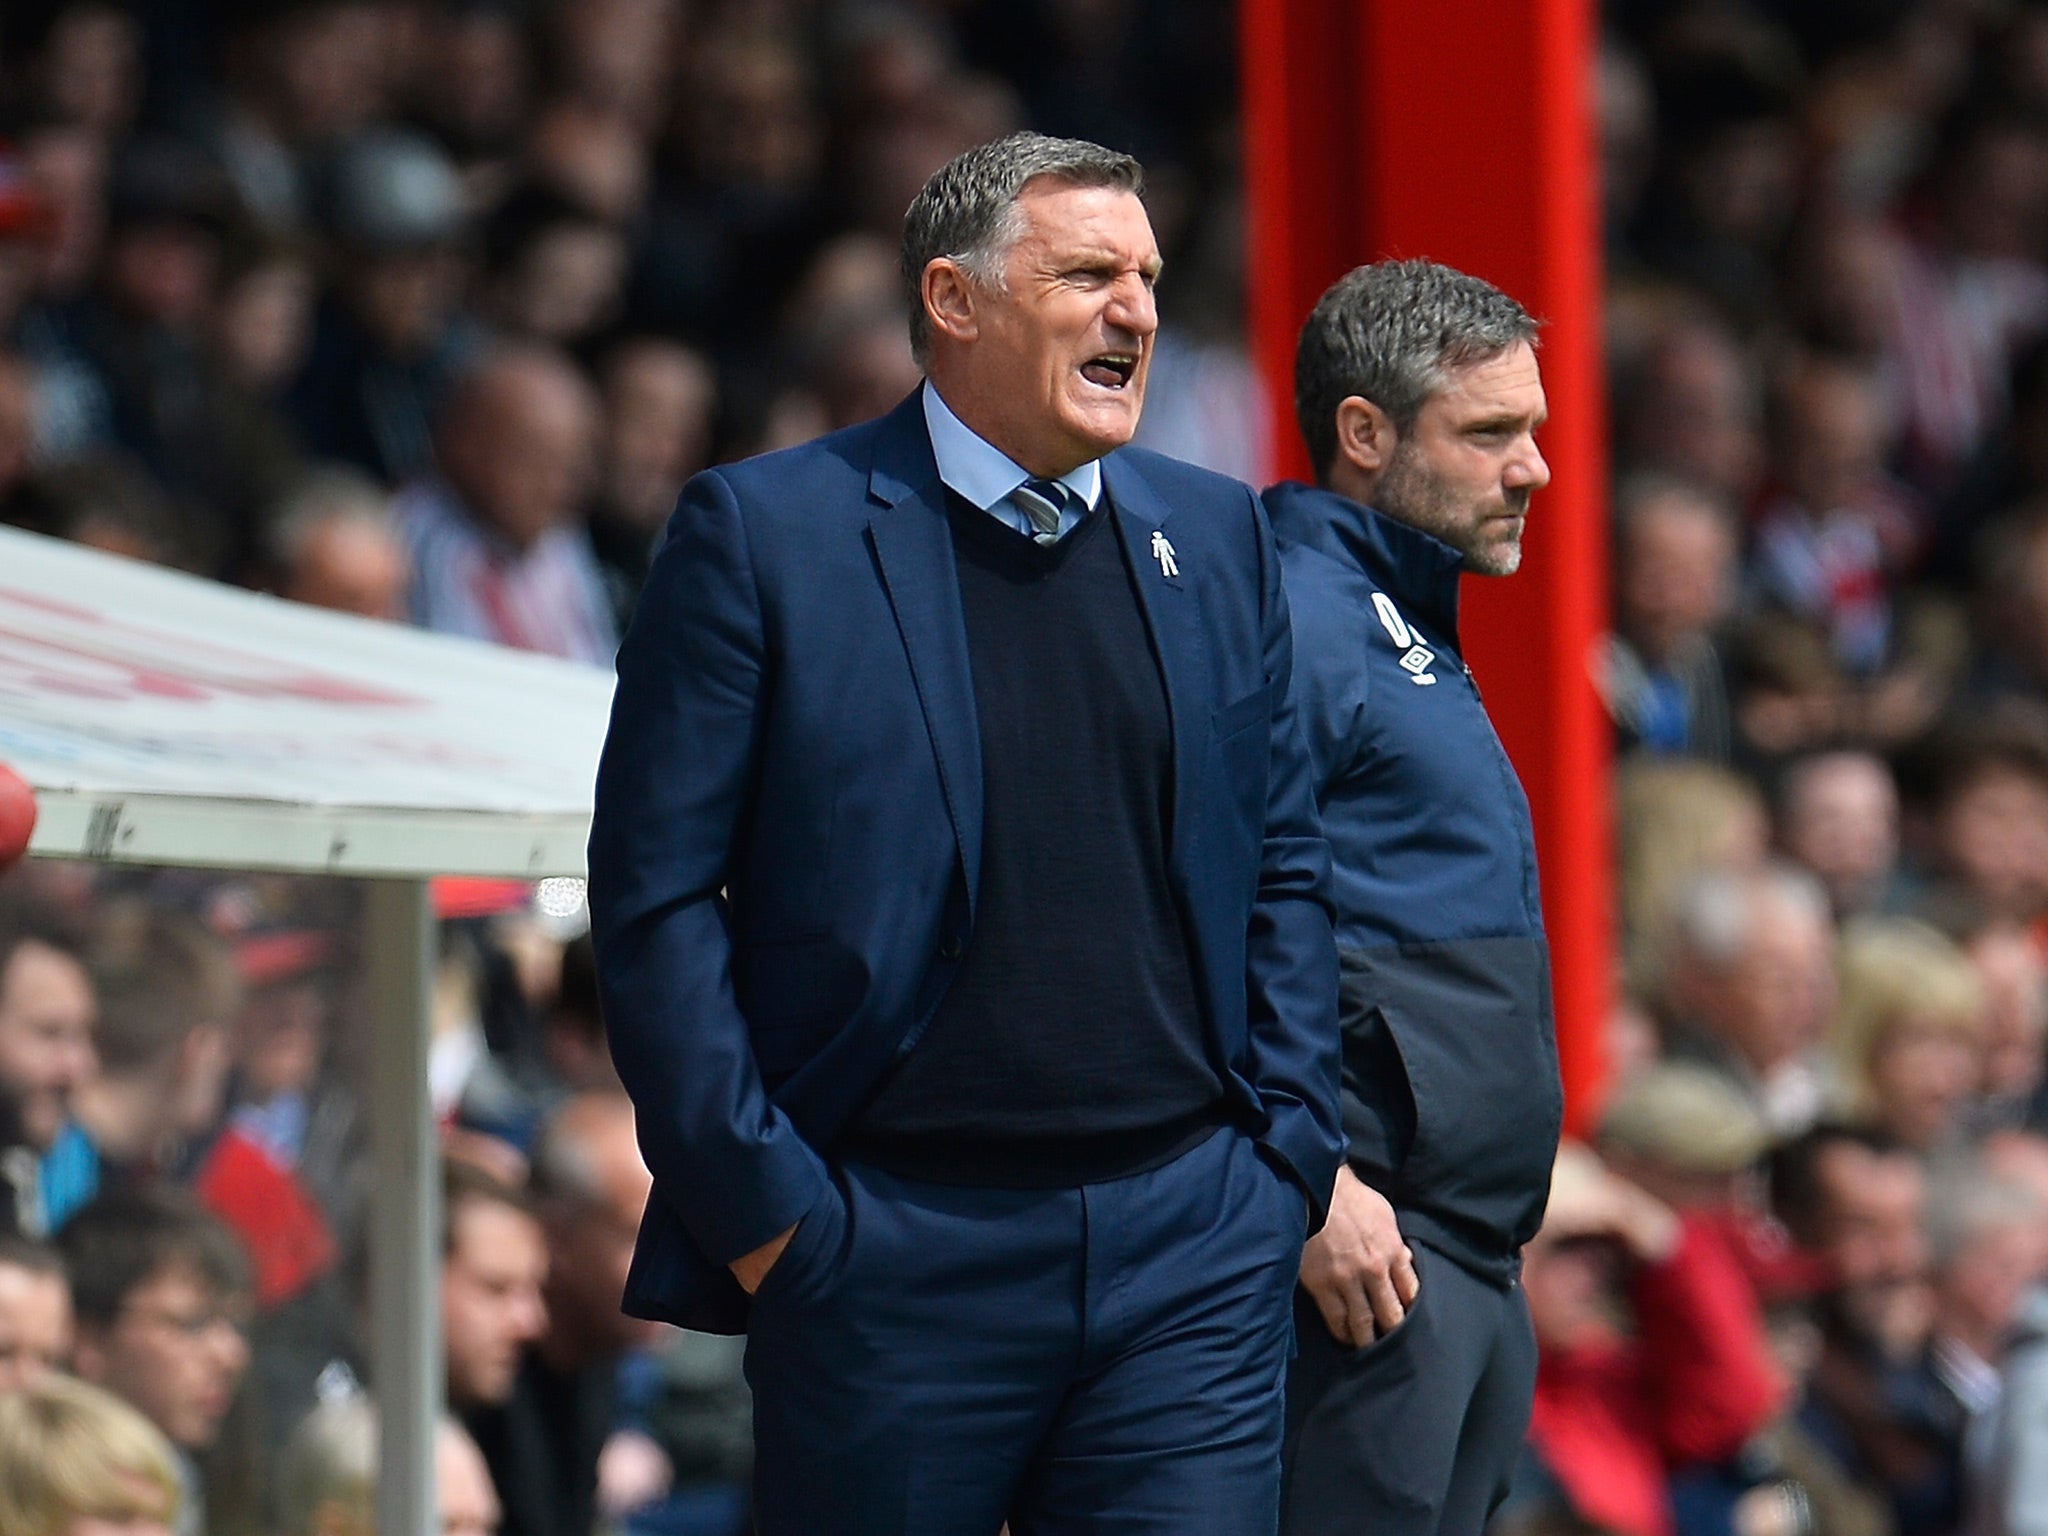 Mowbray's side needed a favour to survive